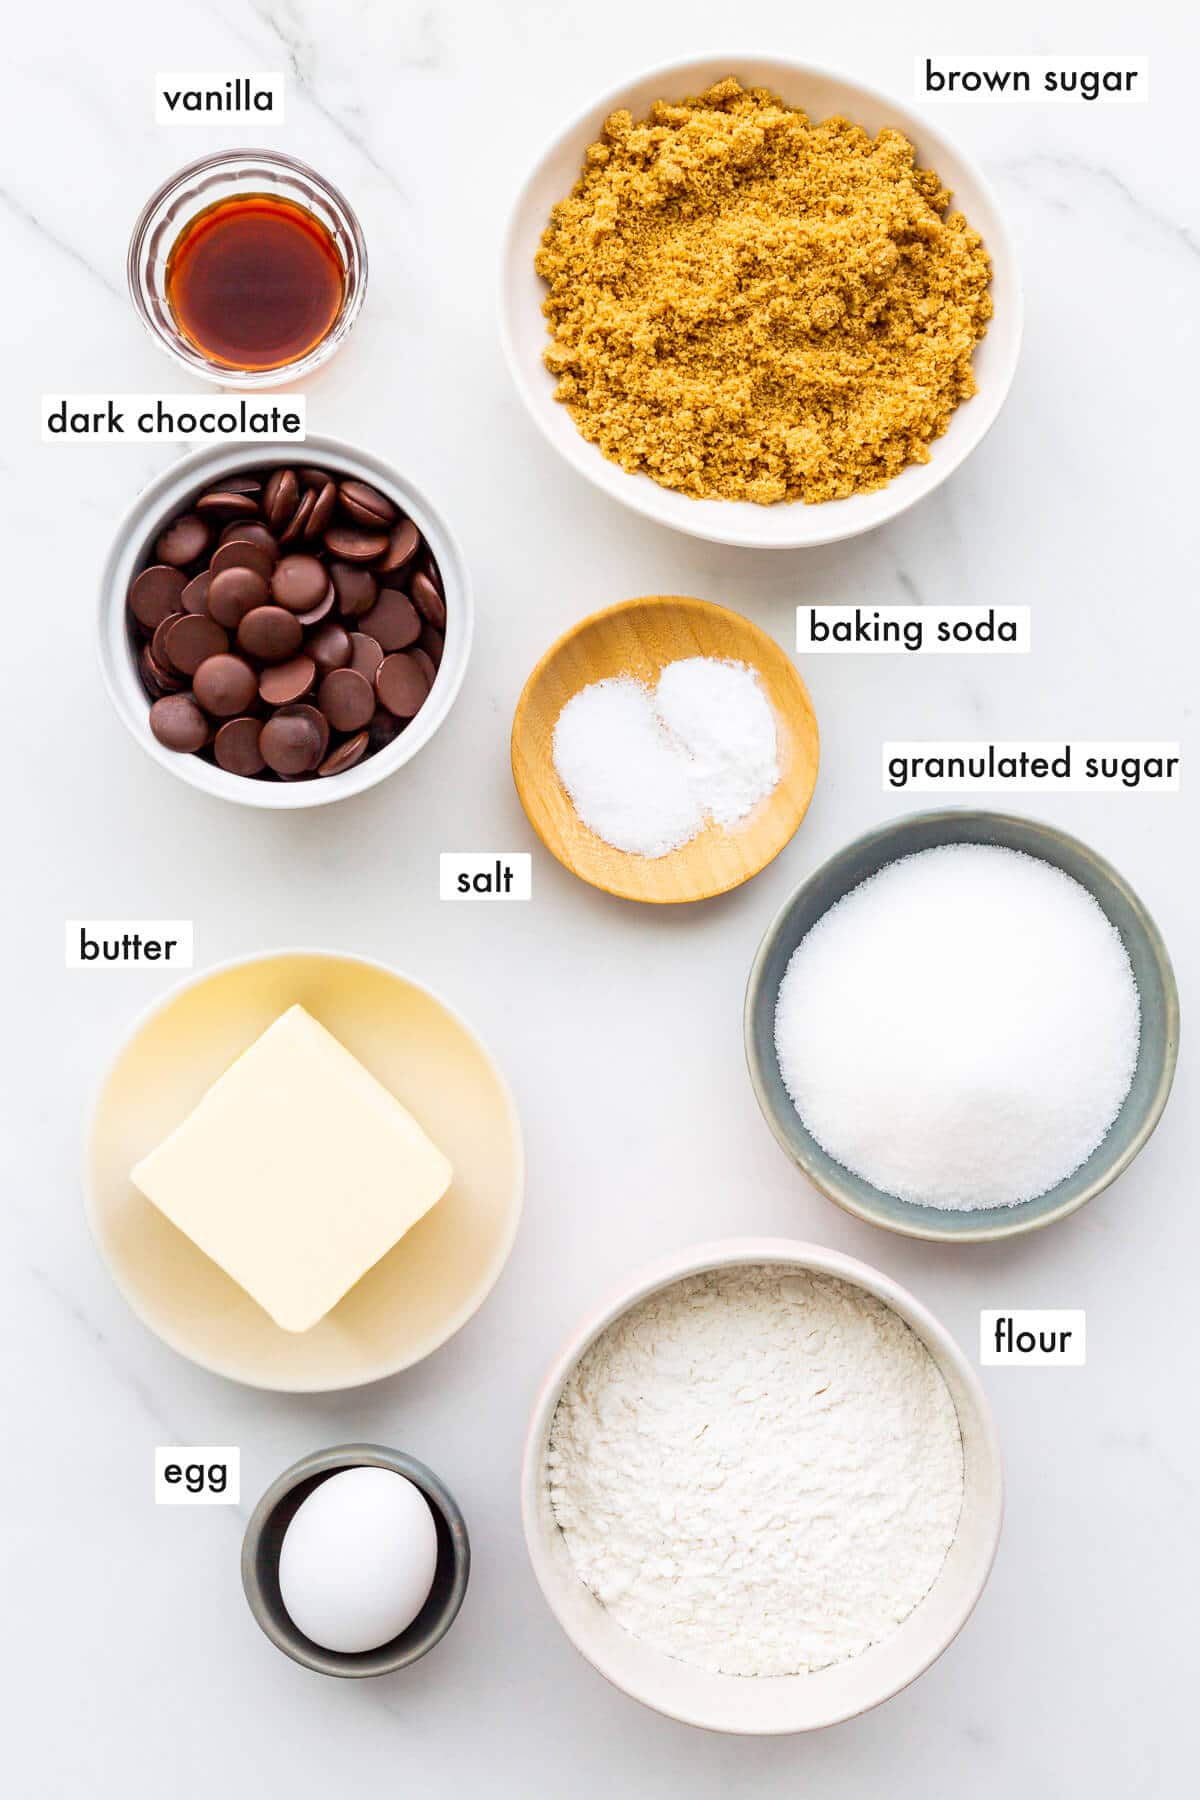 Ingredients to make chocolate chip cookies measured into bowls and ready to bake.